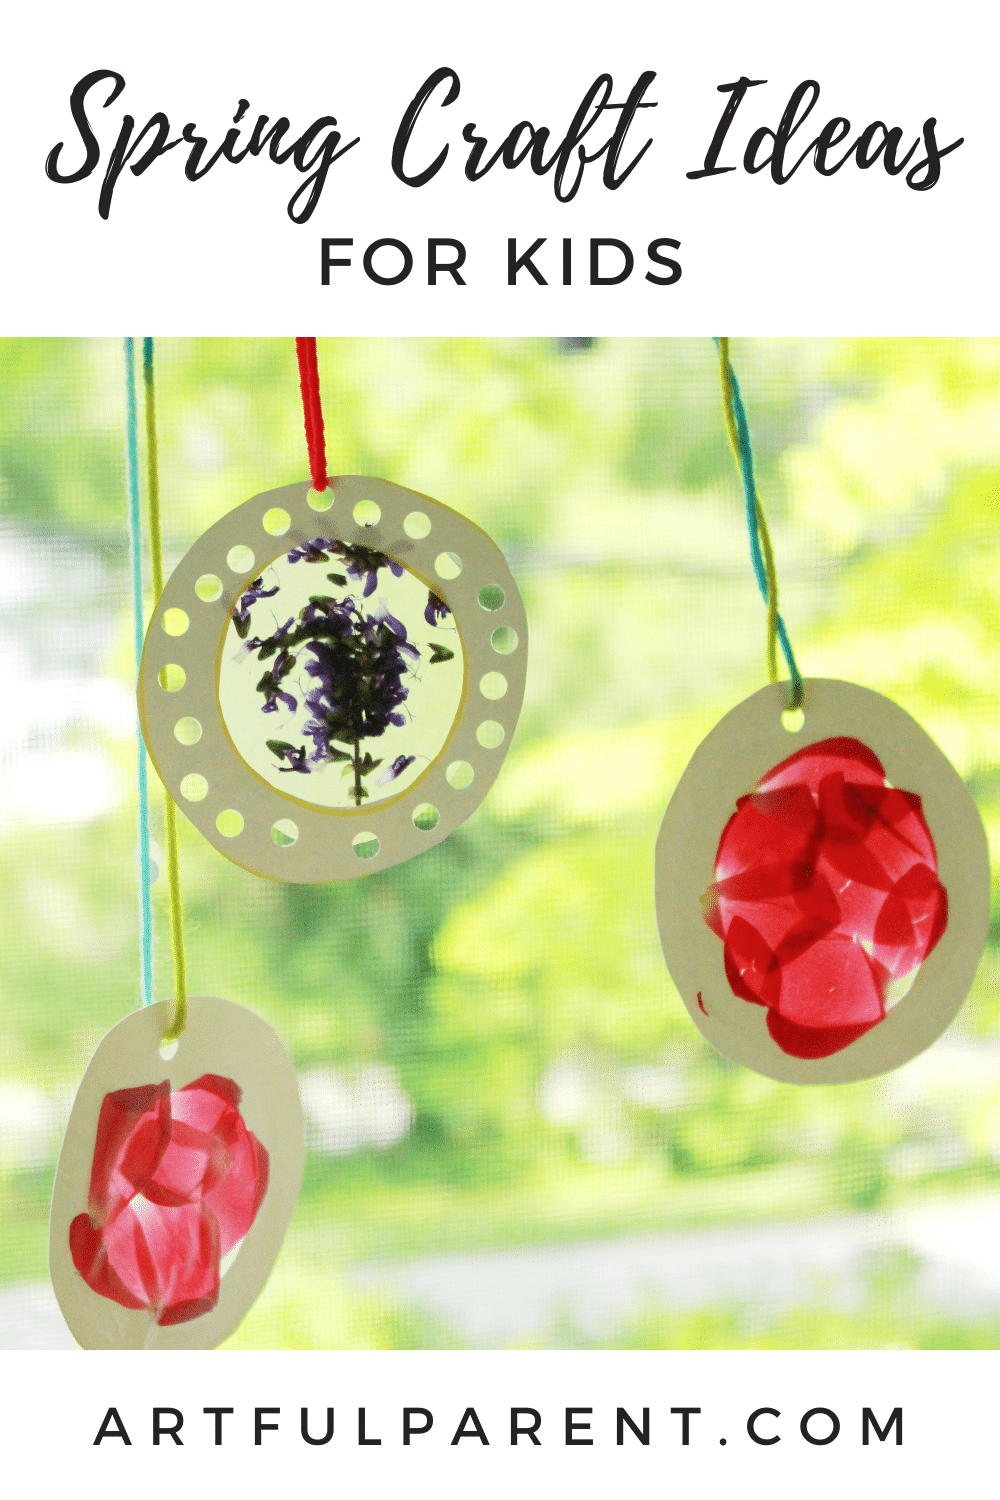 12 Spring Craft Ideas for Kids